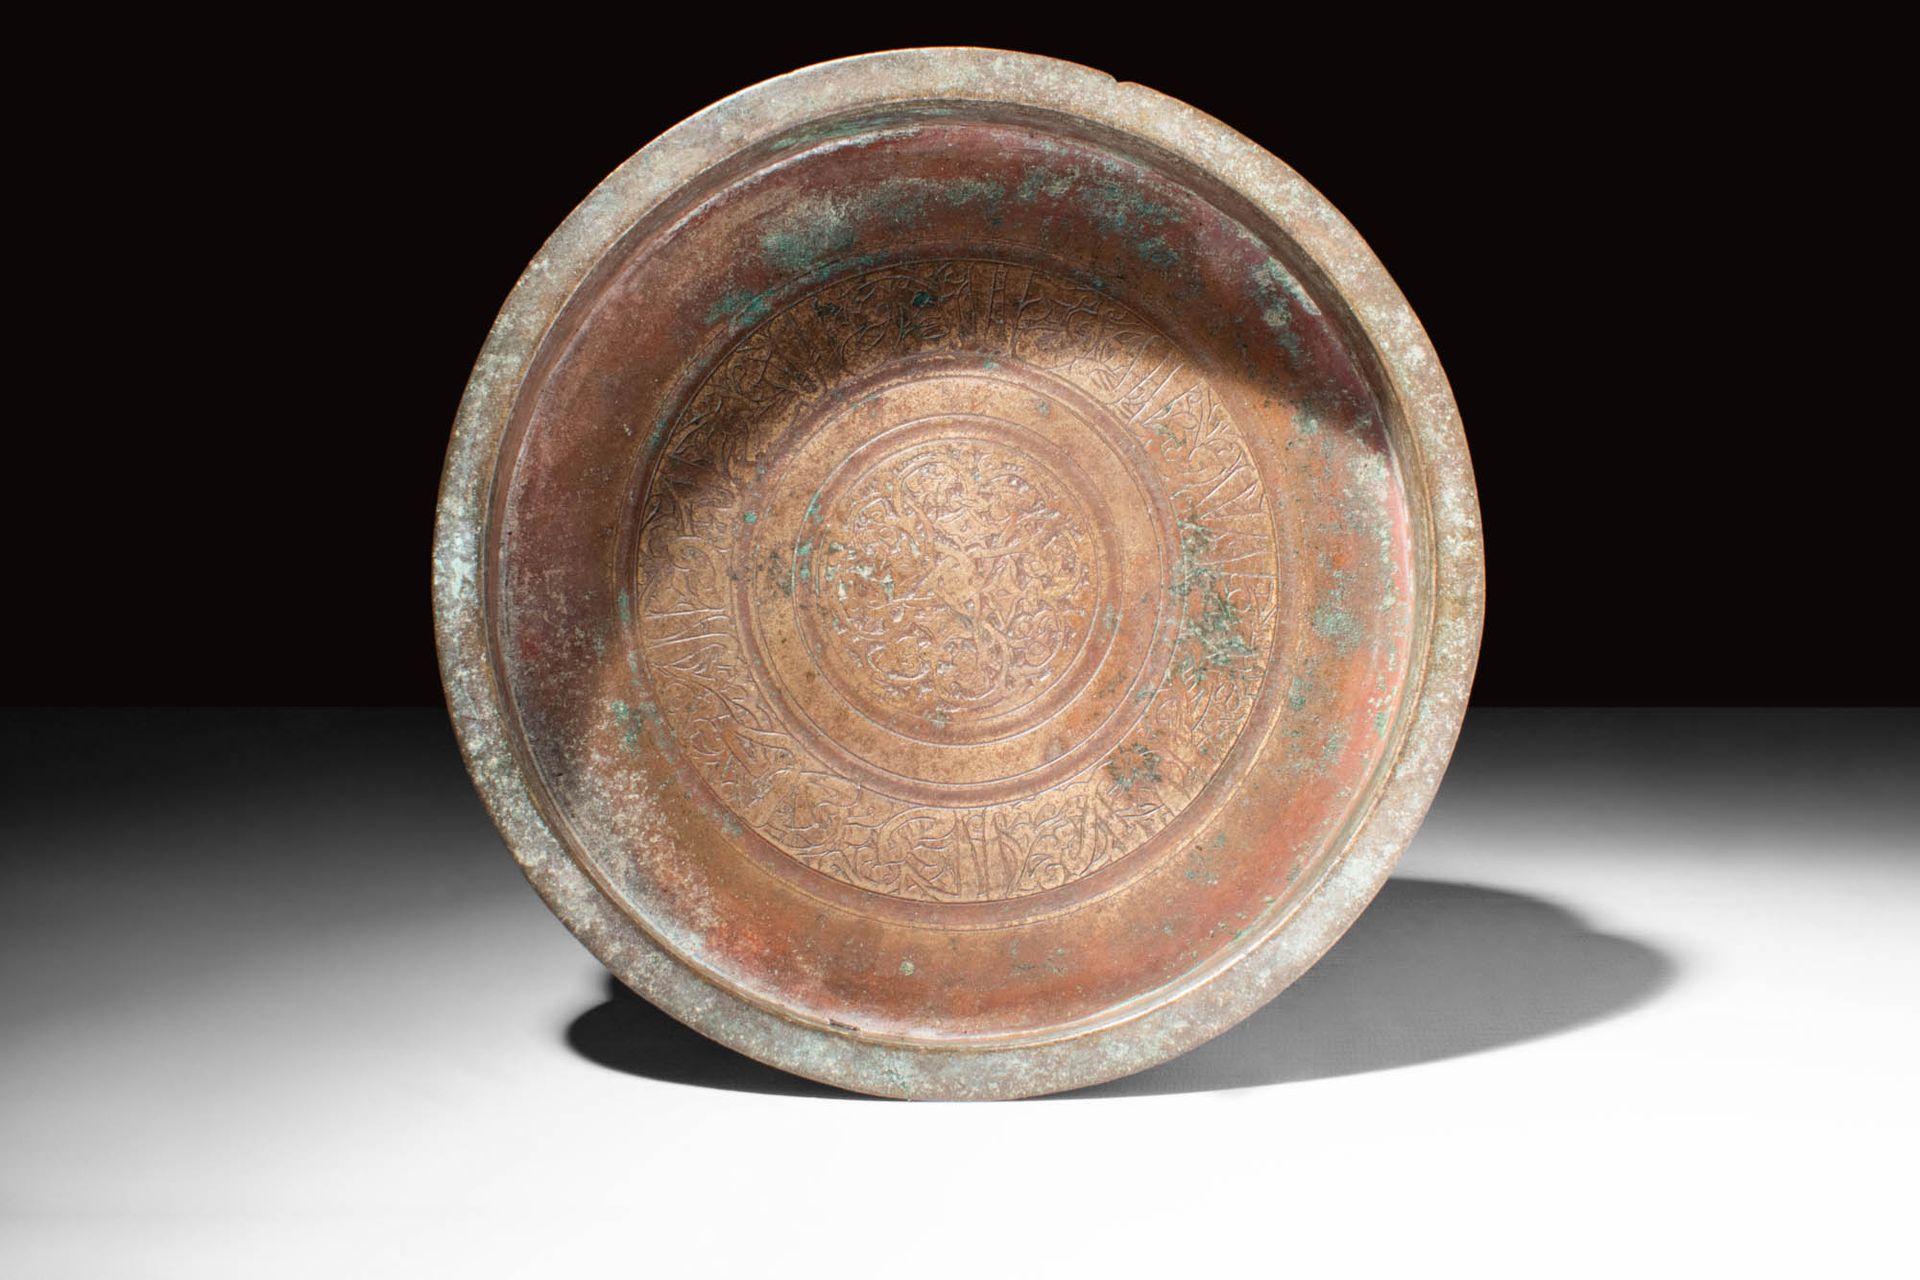 MEDIEVAL SELJUK COPPER ALLOY DECORATED TRAY Ca. AD 1100 - 1300.
Ein rundes Table&hellip;